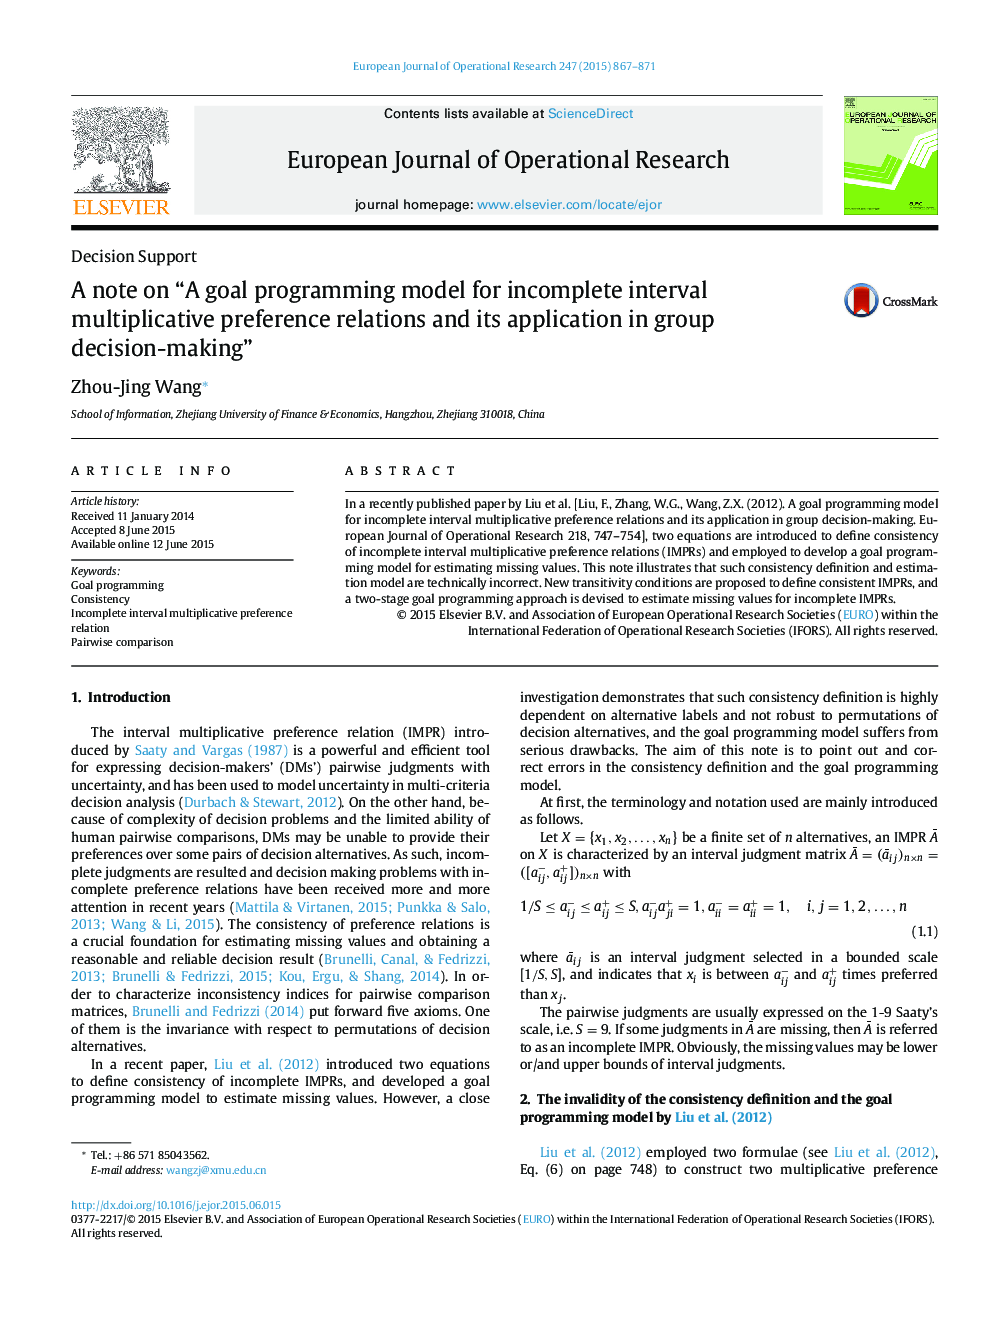 A note on “A goal programming model for incomplete interval multiplicative preference relations and its application in group decision-making”